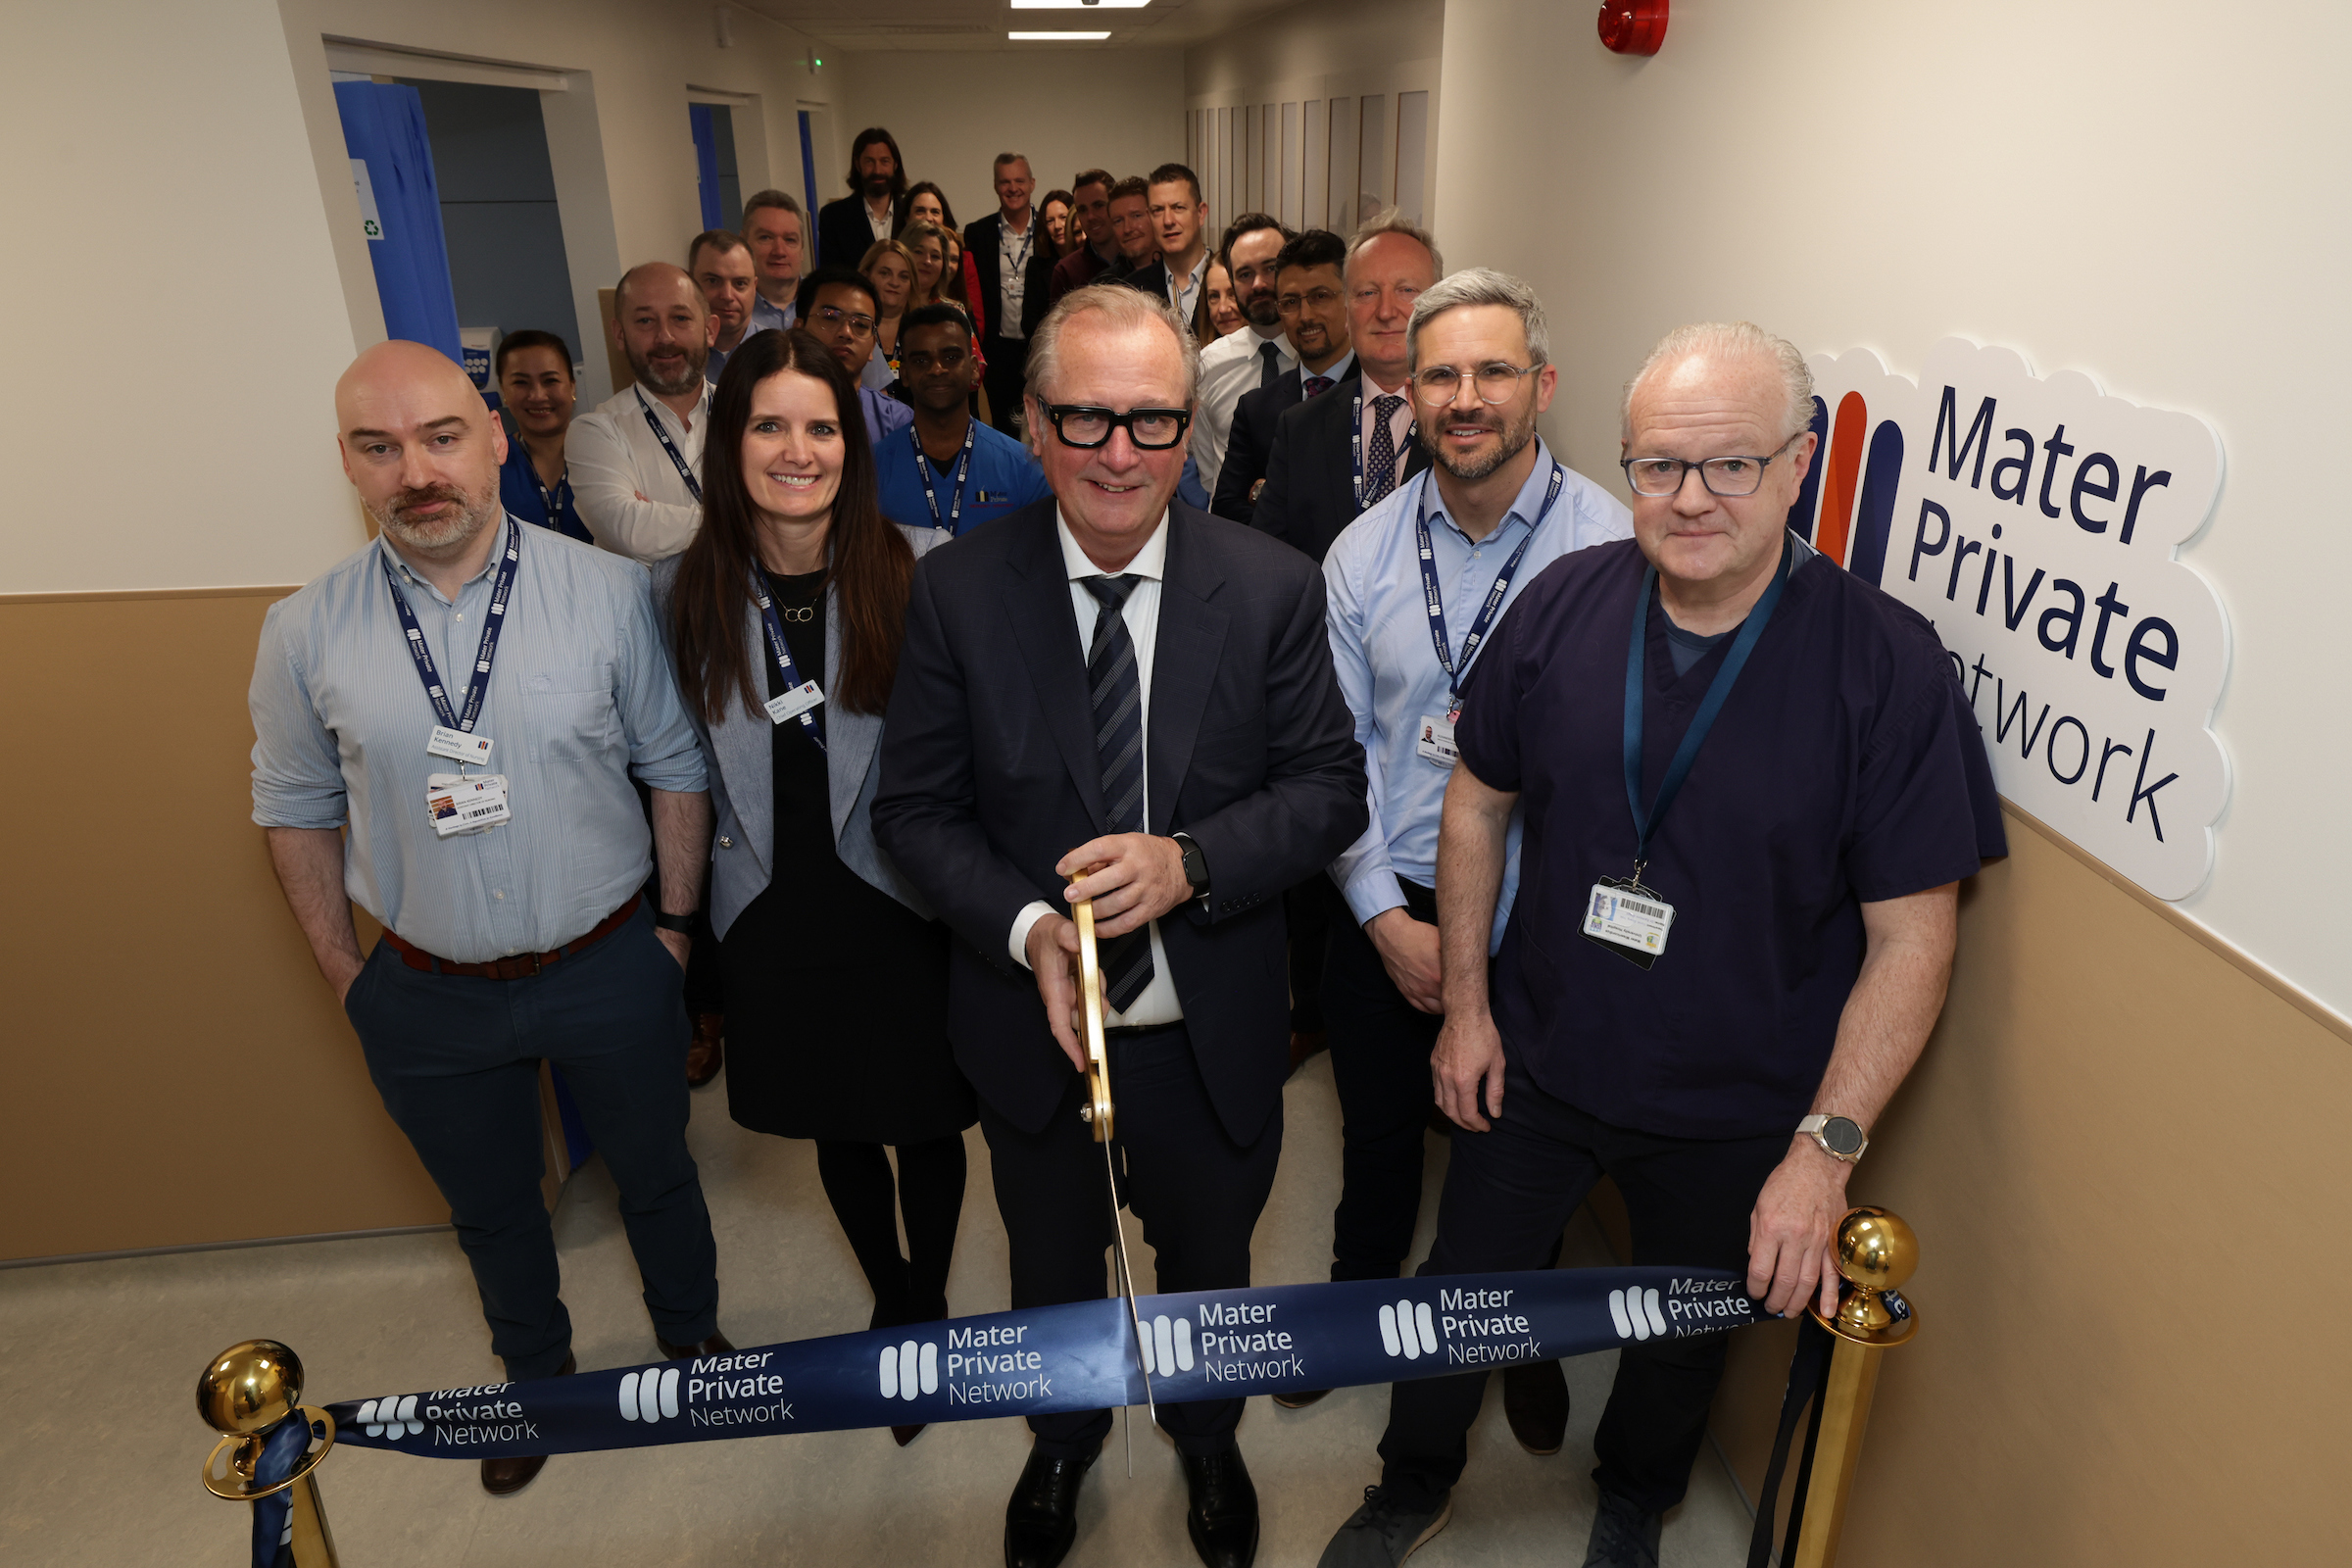 Mater Private Network CEO John Hurley officially opens new Emergency Department Bays at Eccles Street in Dublin. He is cutting a navy Mater Private ribbon with large scissors and is surrounded by staff.